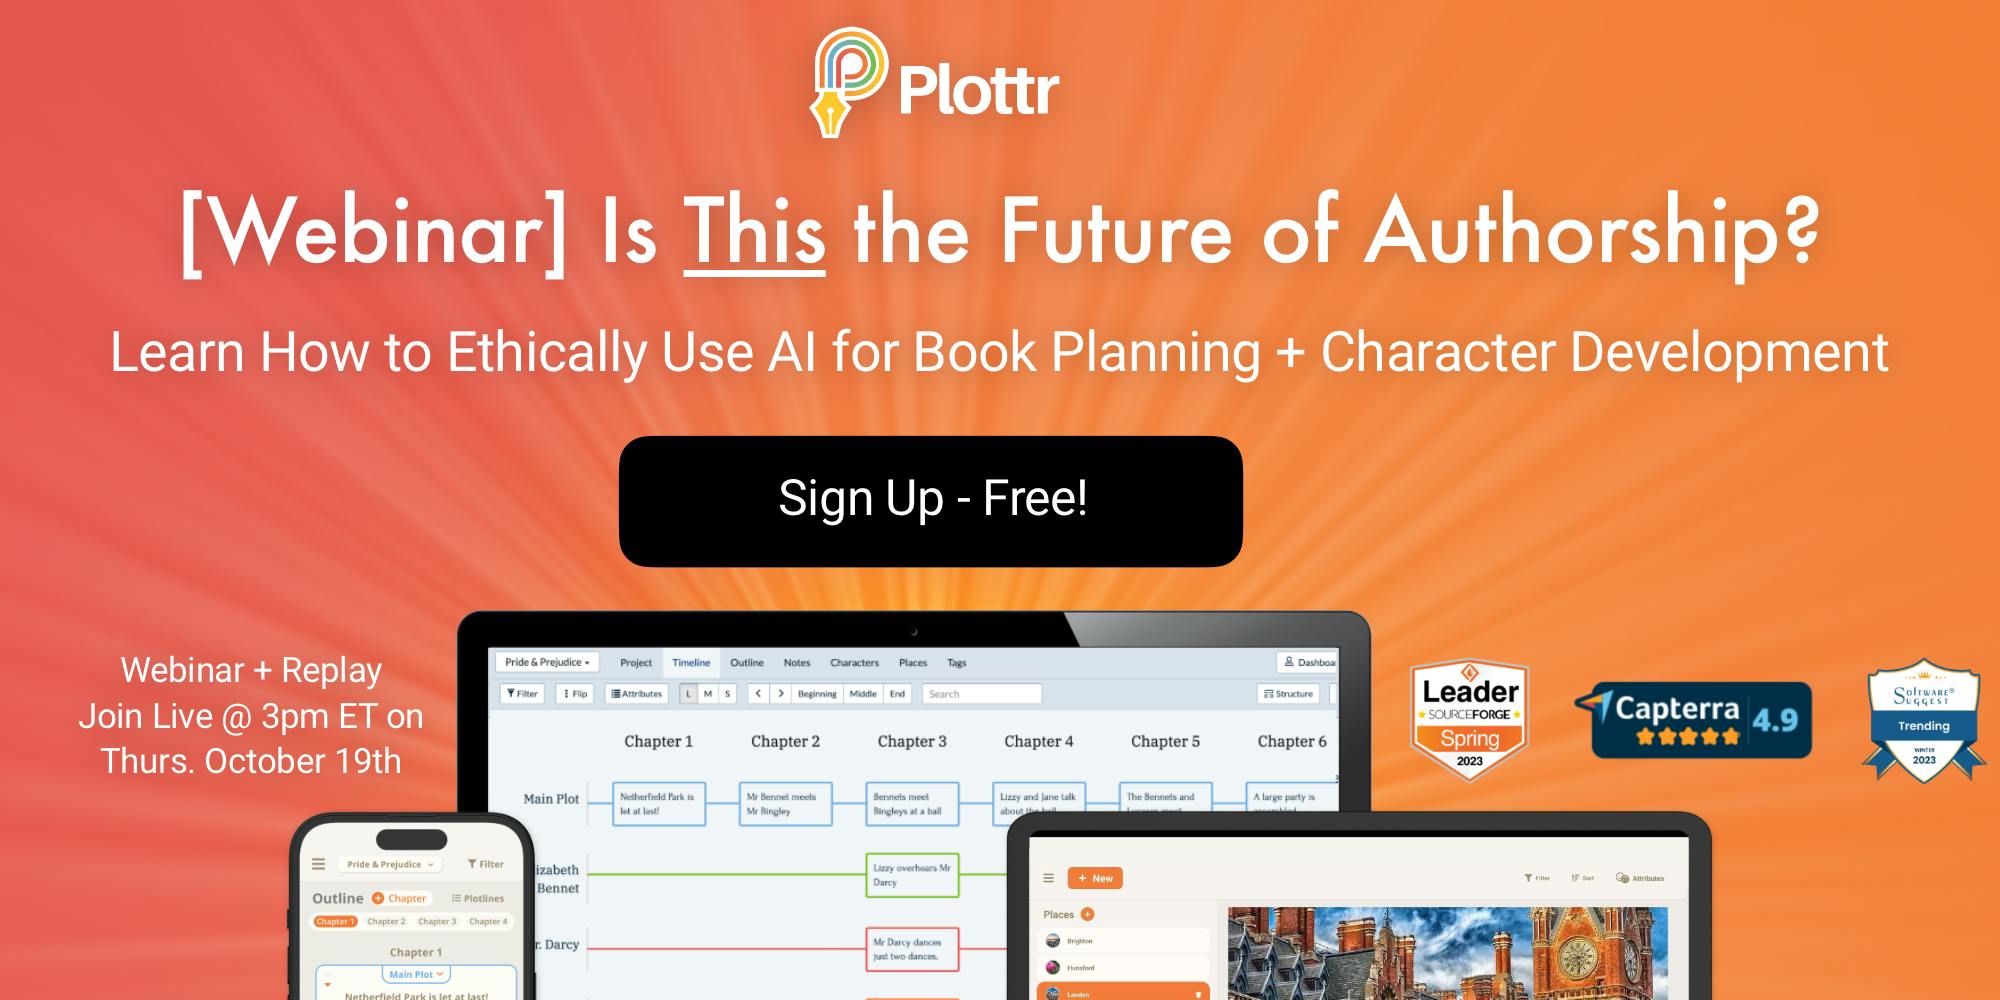 Plottr. [Webinar] Is This the Future of Authorship? Learn how to ethically use AI for book planning and character development. Sign up - Free! Webinar and replay available. Join live at 3pm Eastern on Thursday, October 19.